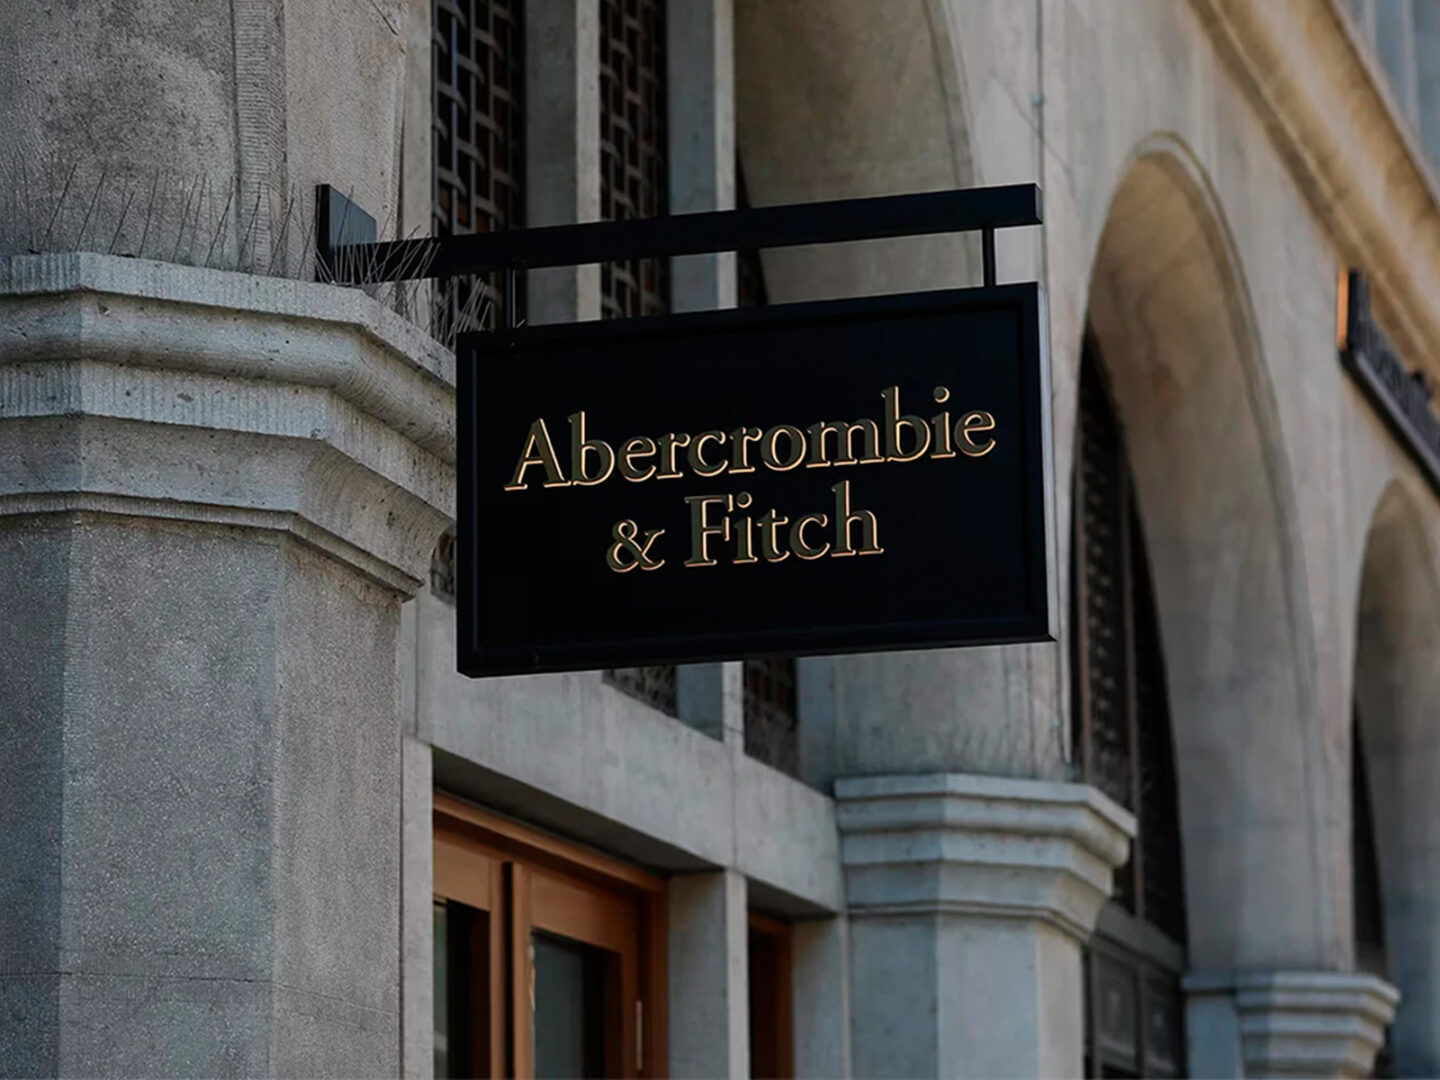 Former Abercrombie & Fitch executives charged with sex trafficking